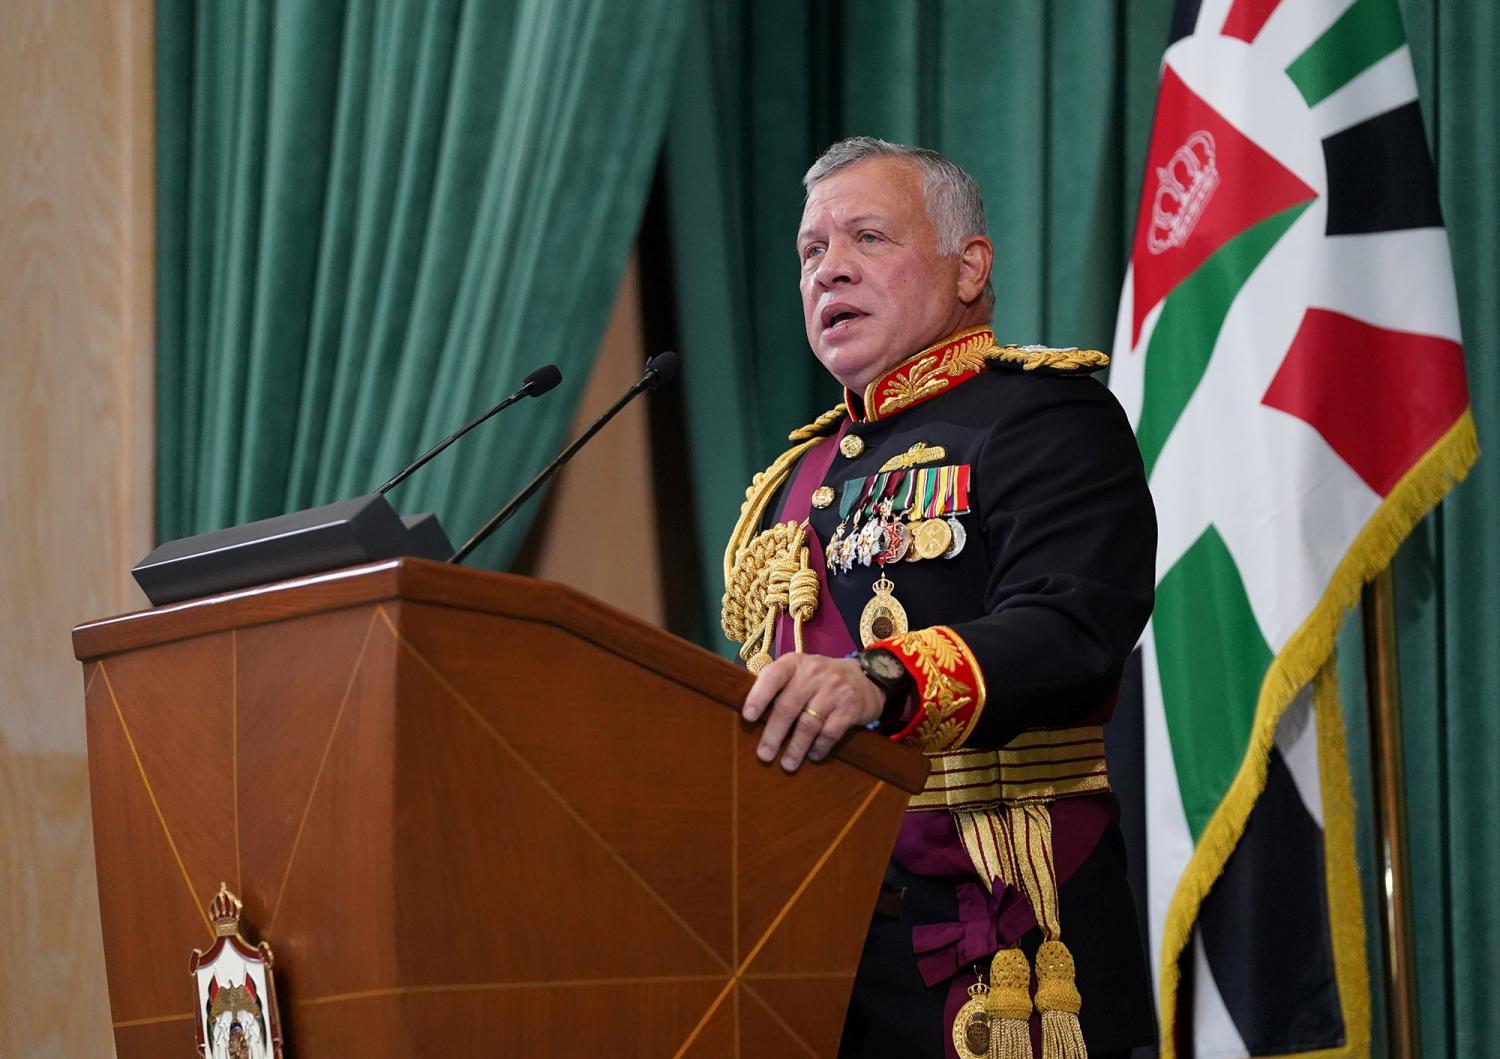 Jordan's King Abdullah II speaks during the inauguration of the 19th Parliament's non-ordinary session in Amman, Jordan December 10, 2020. Jordanian Royal Palace/Handout via Reuters ATTENTION EDITORS - THIS IMAGE HAS BEEN SUPPLIED BY A THIRD PARTY.  NO RESALES. NO ARCHIVES